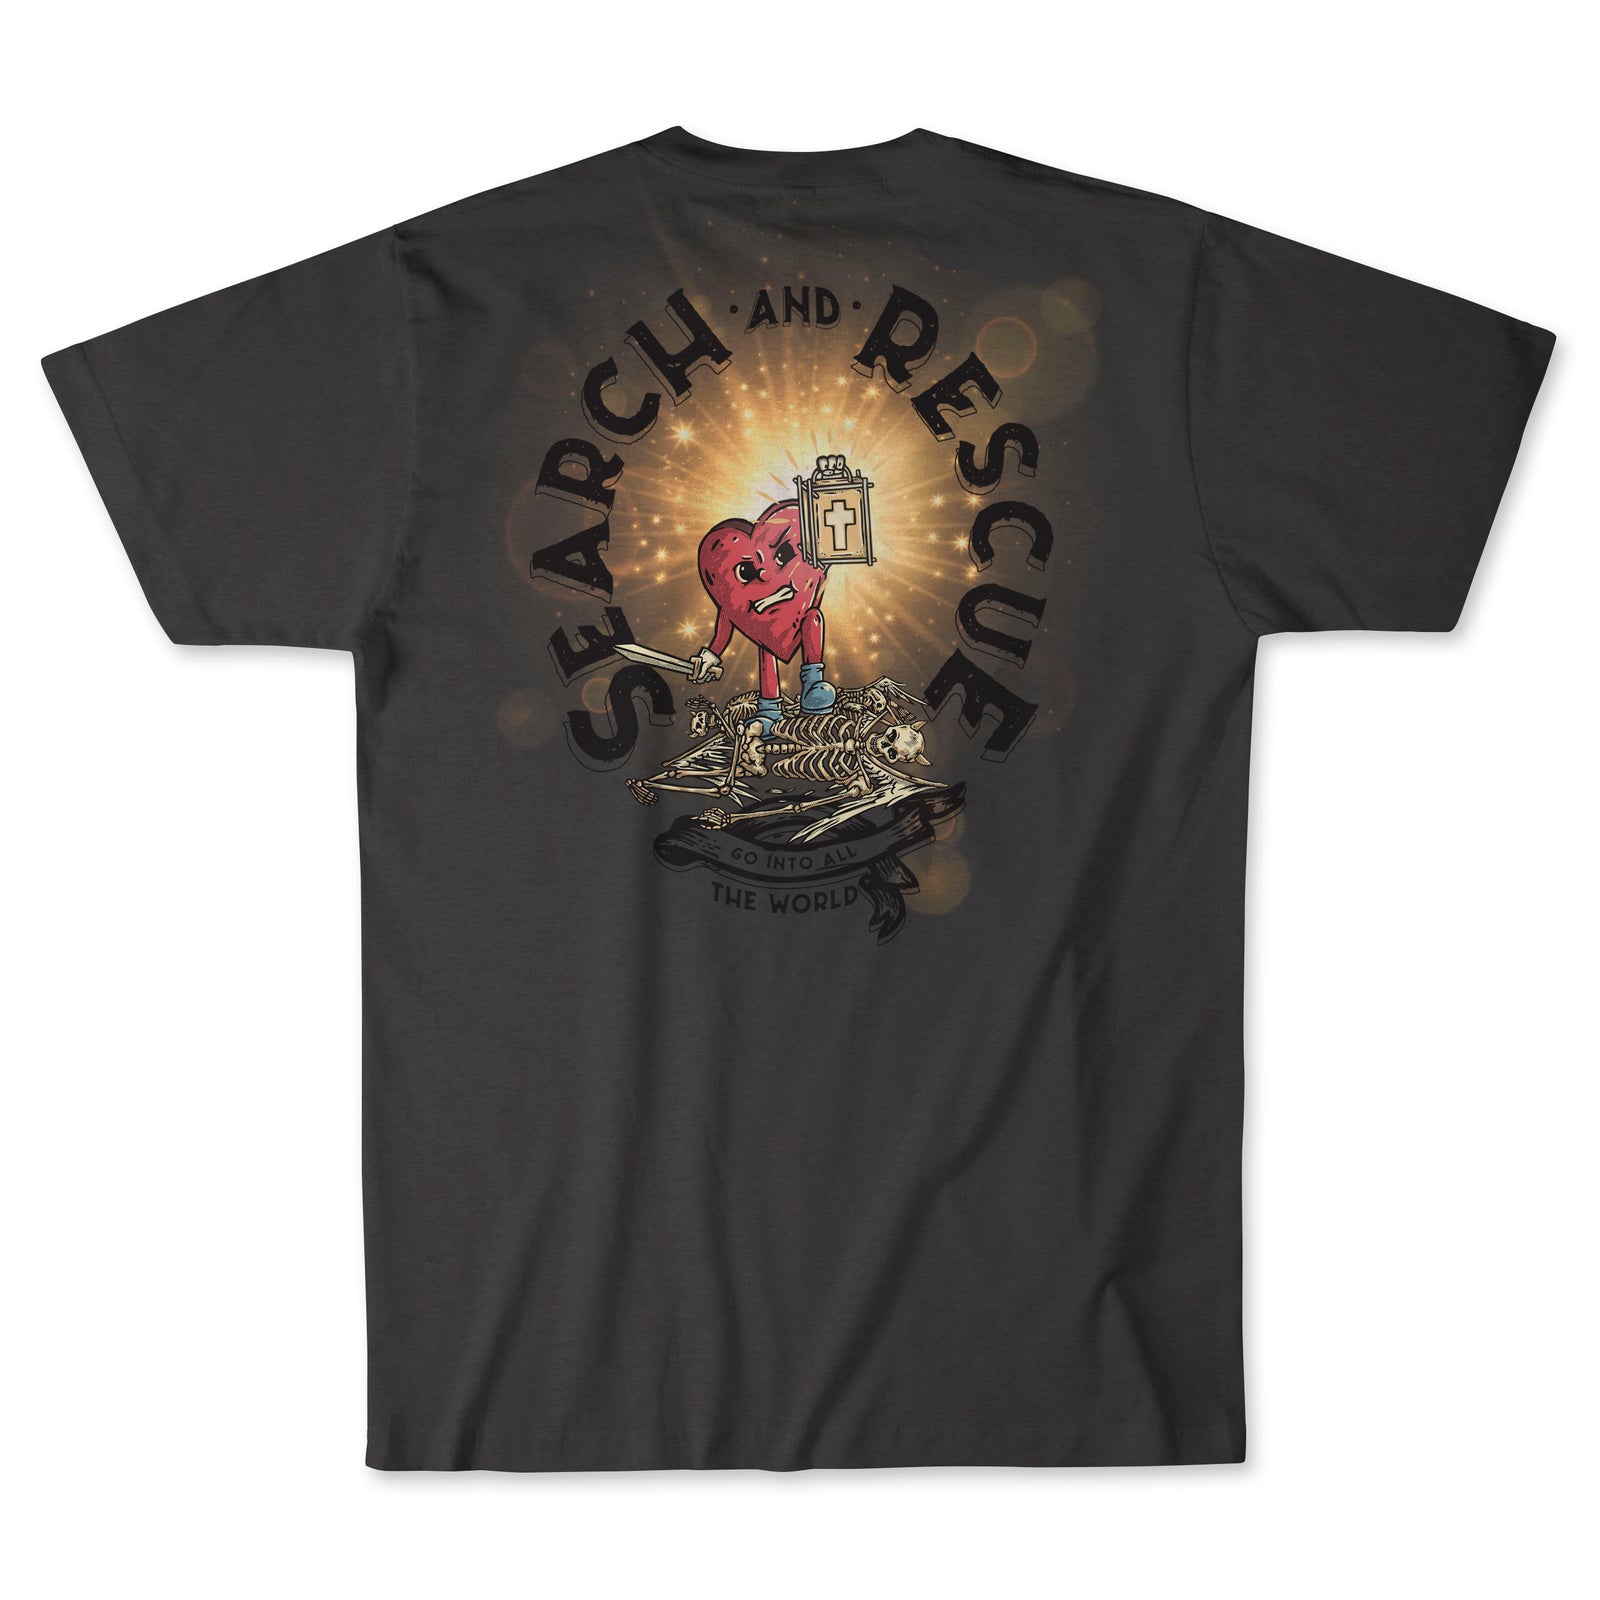 User blog:Barnacles1or2/Fan Club: T-Shirt Promo And New Eps